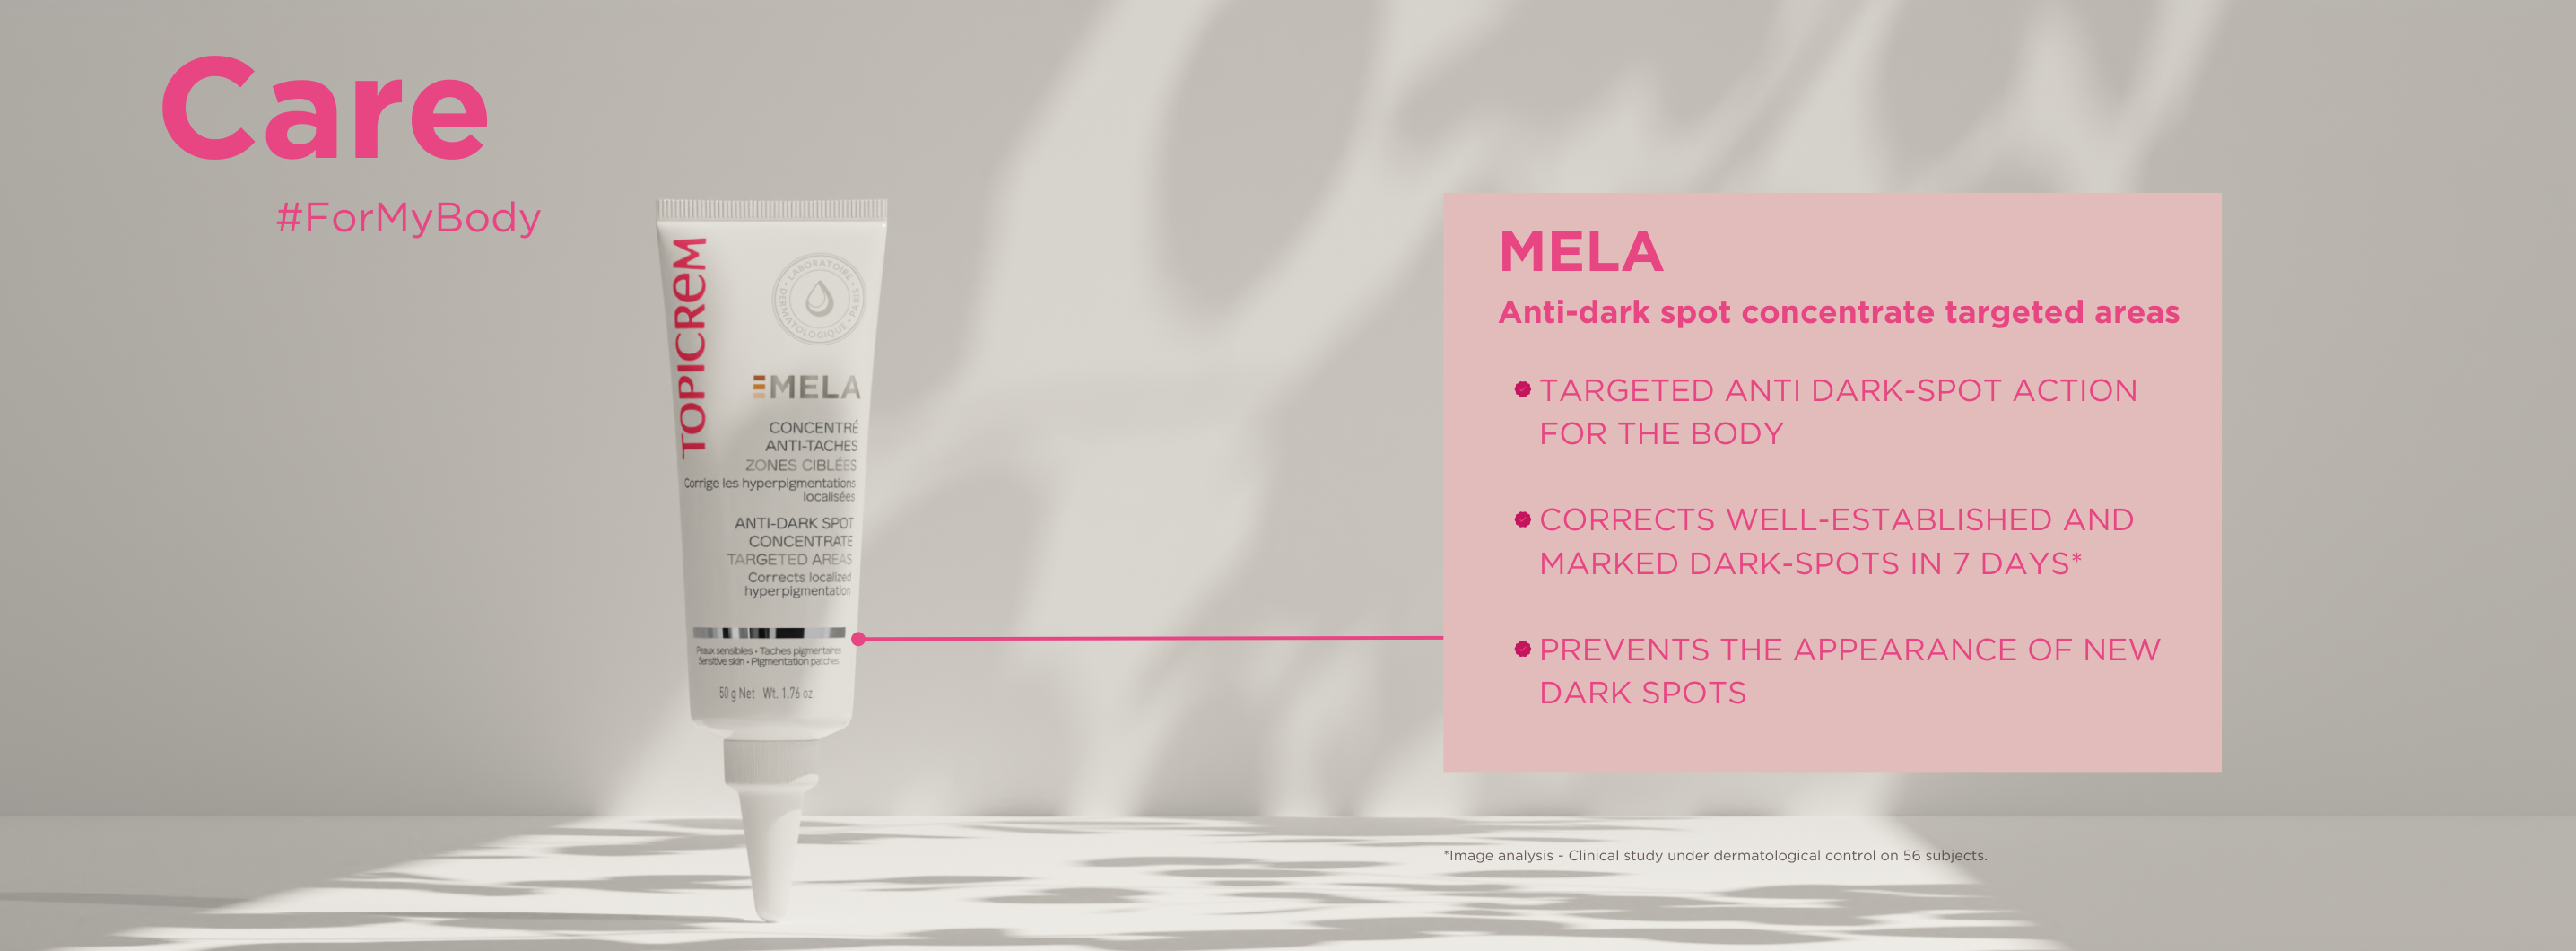 ANTI-DARK SPOT CONCENTRATE TARGETED AREAS